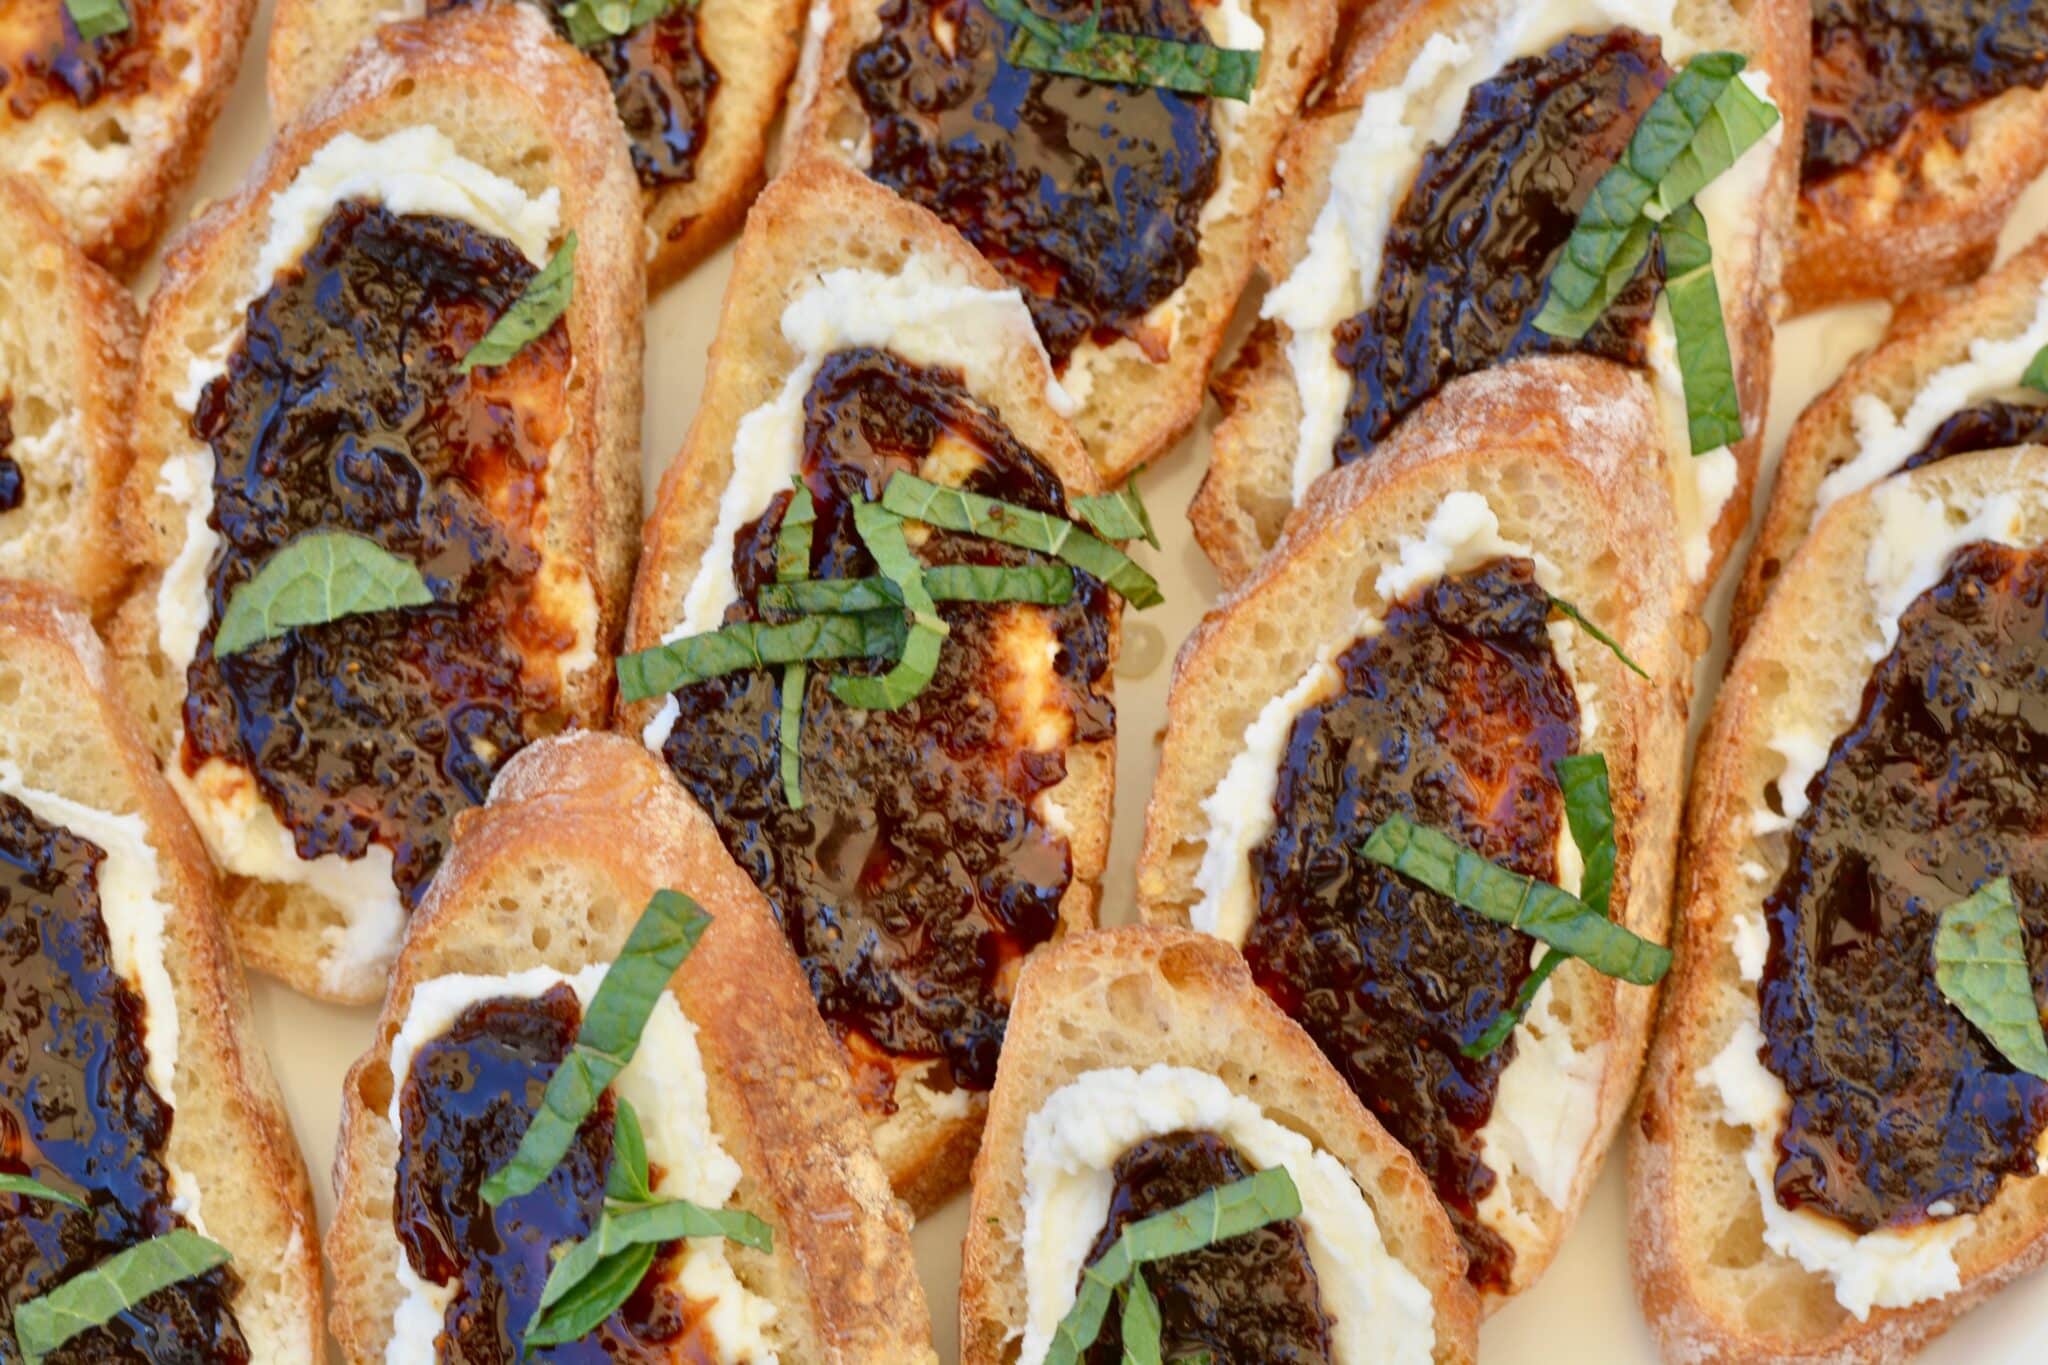 Goat Cheese and Fig Crostini with Honey and Mint. Perfectly fresh and delicious appetizer for any gathering. Kids loved it too!